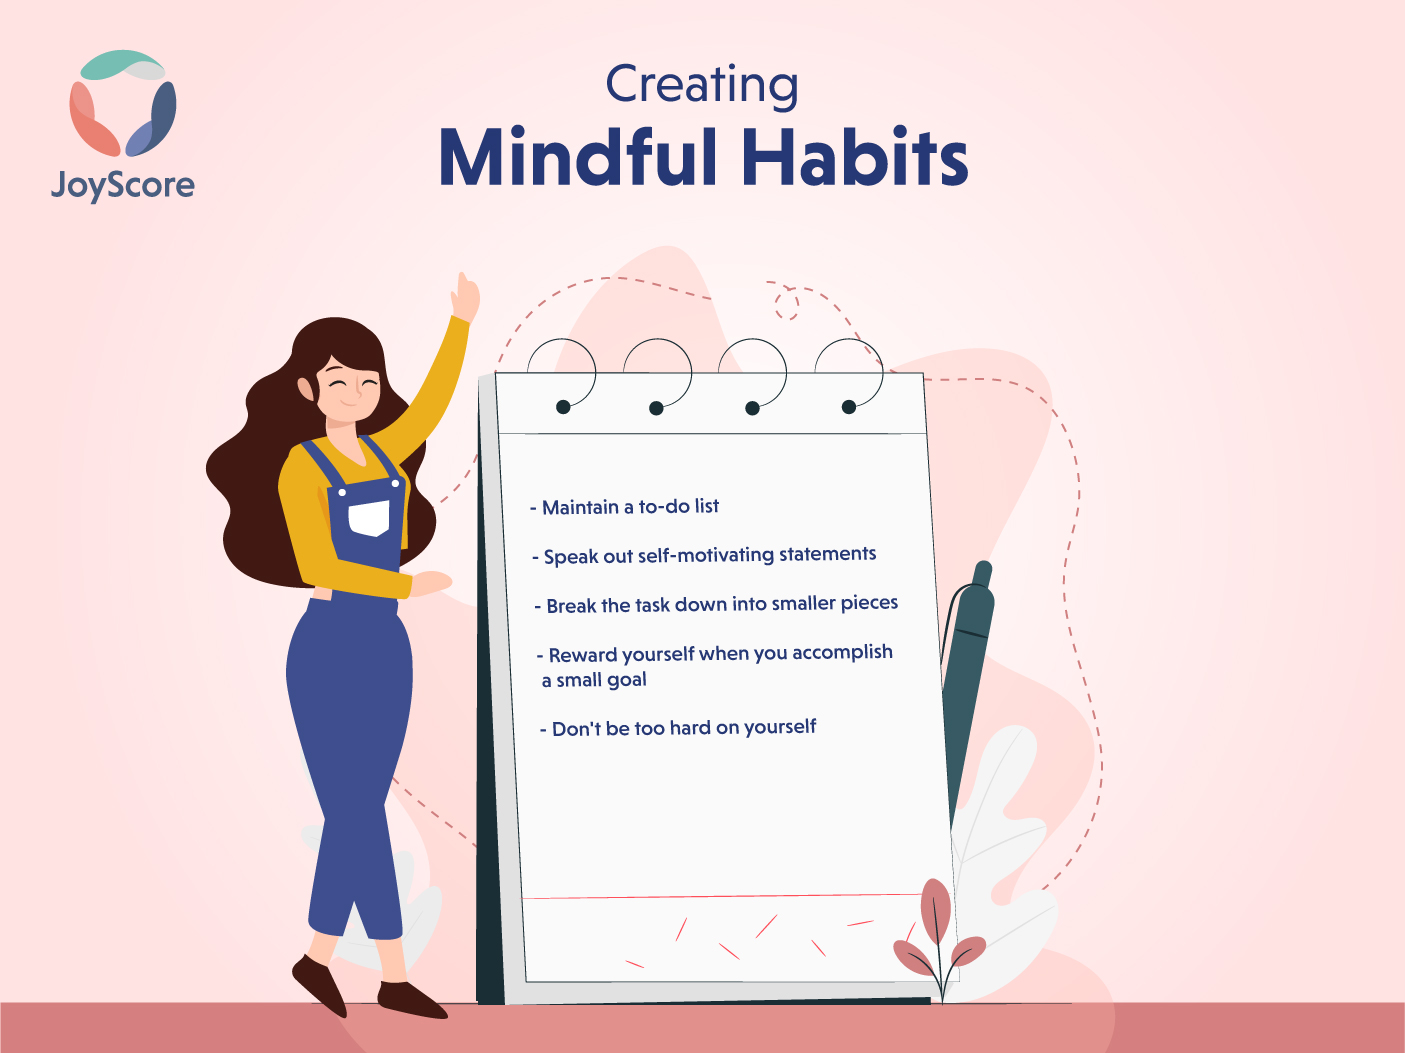 How to get over procrastination by creating mindful habits